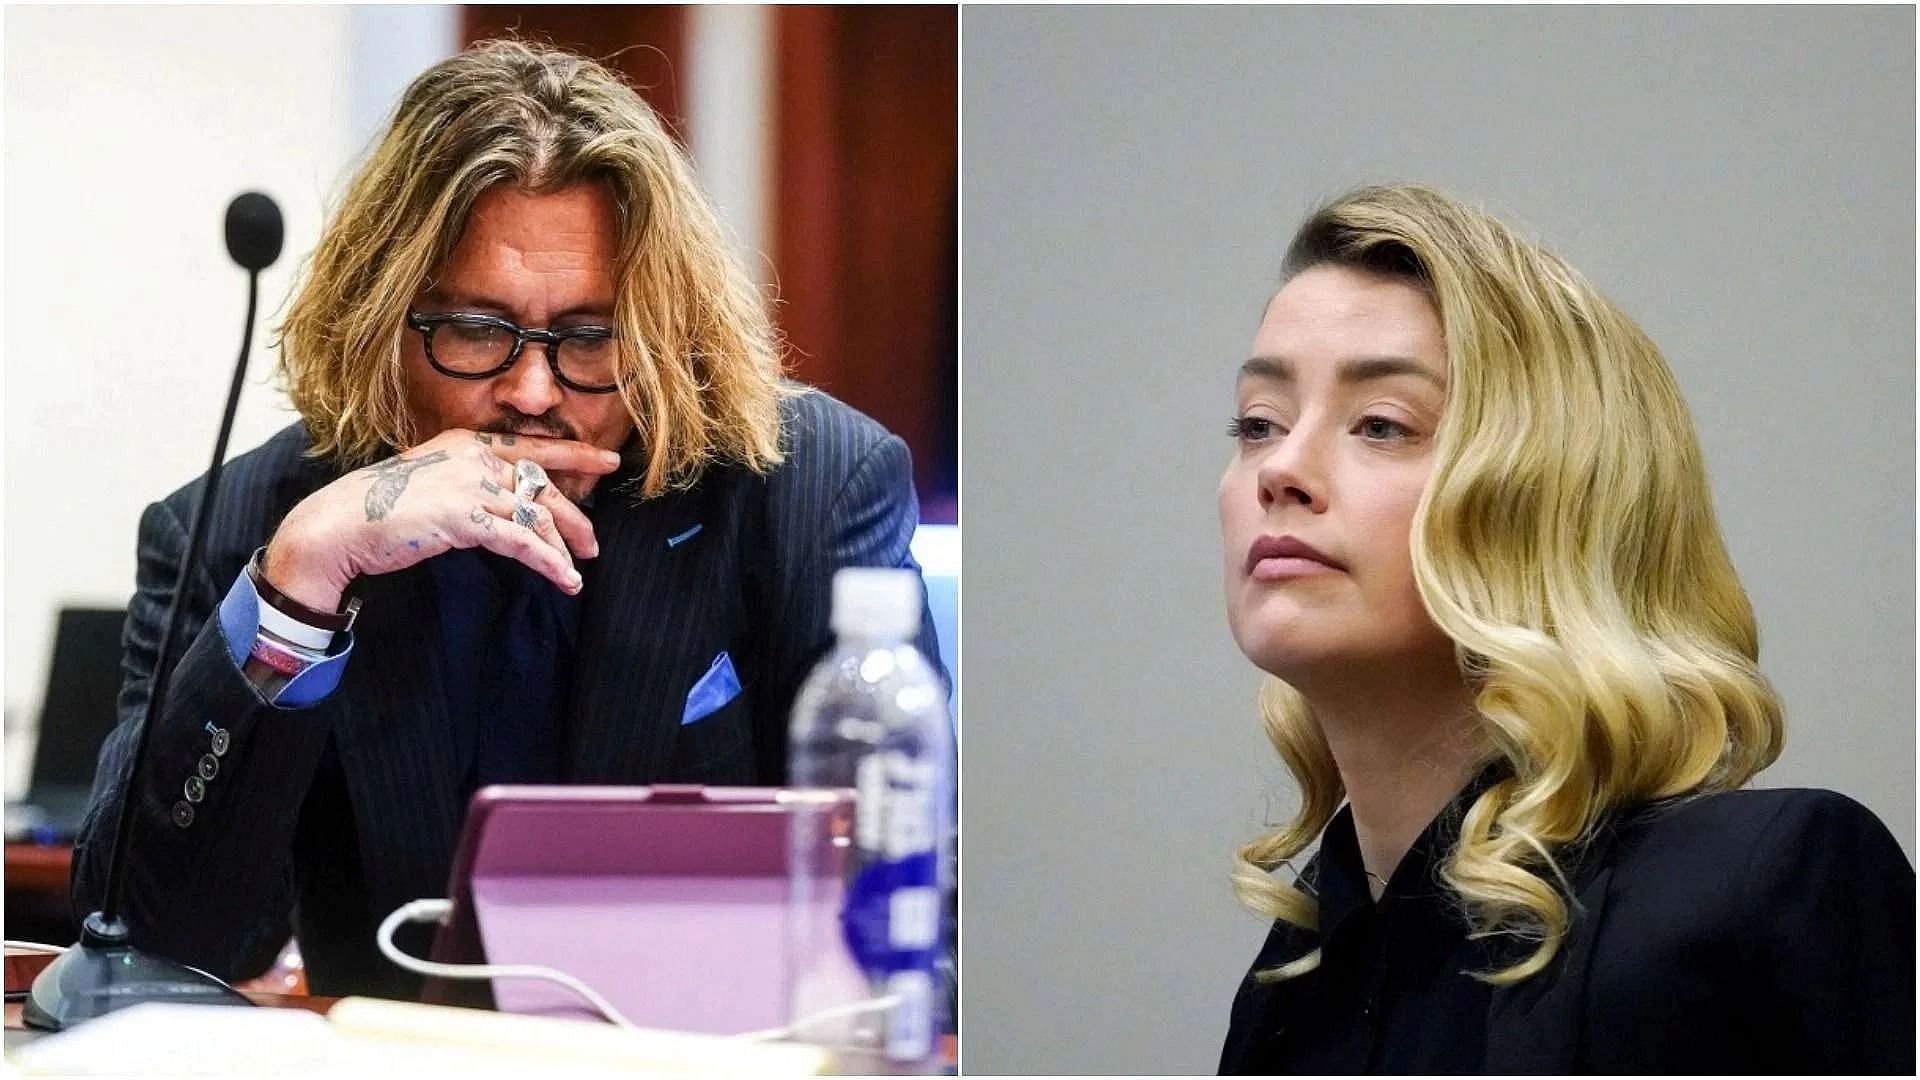 Johnny Depp and Amber Heard in court (Image via Pool/AFP/Getty Images)